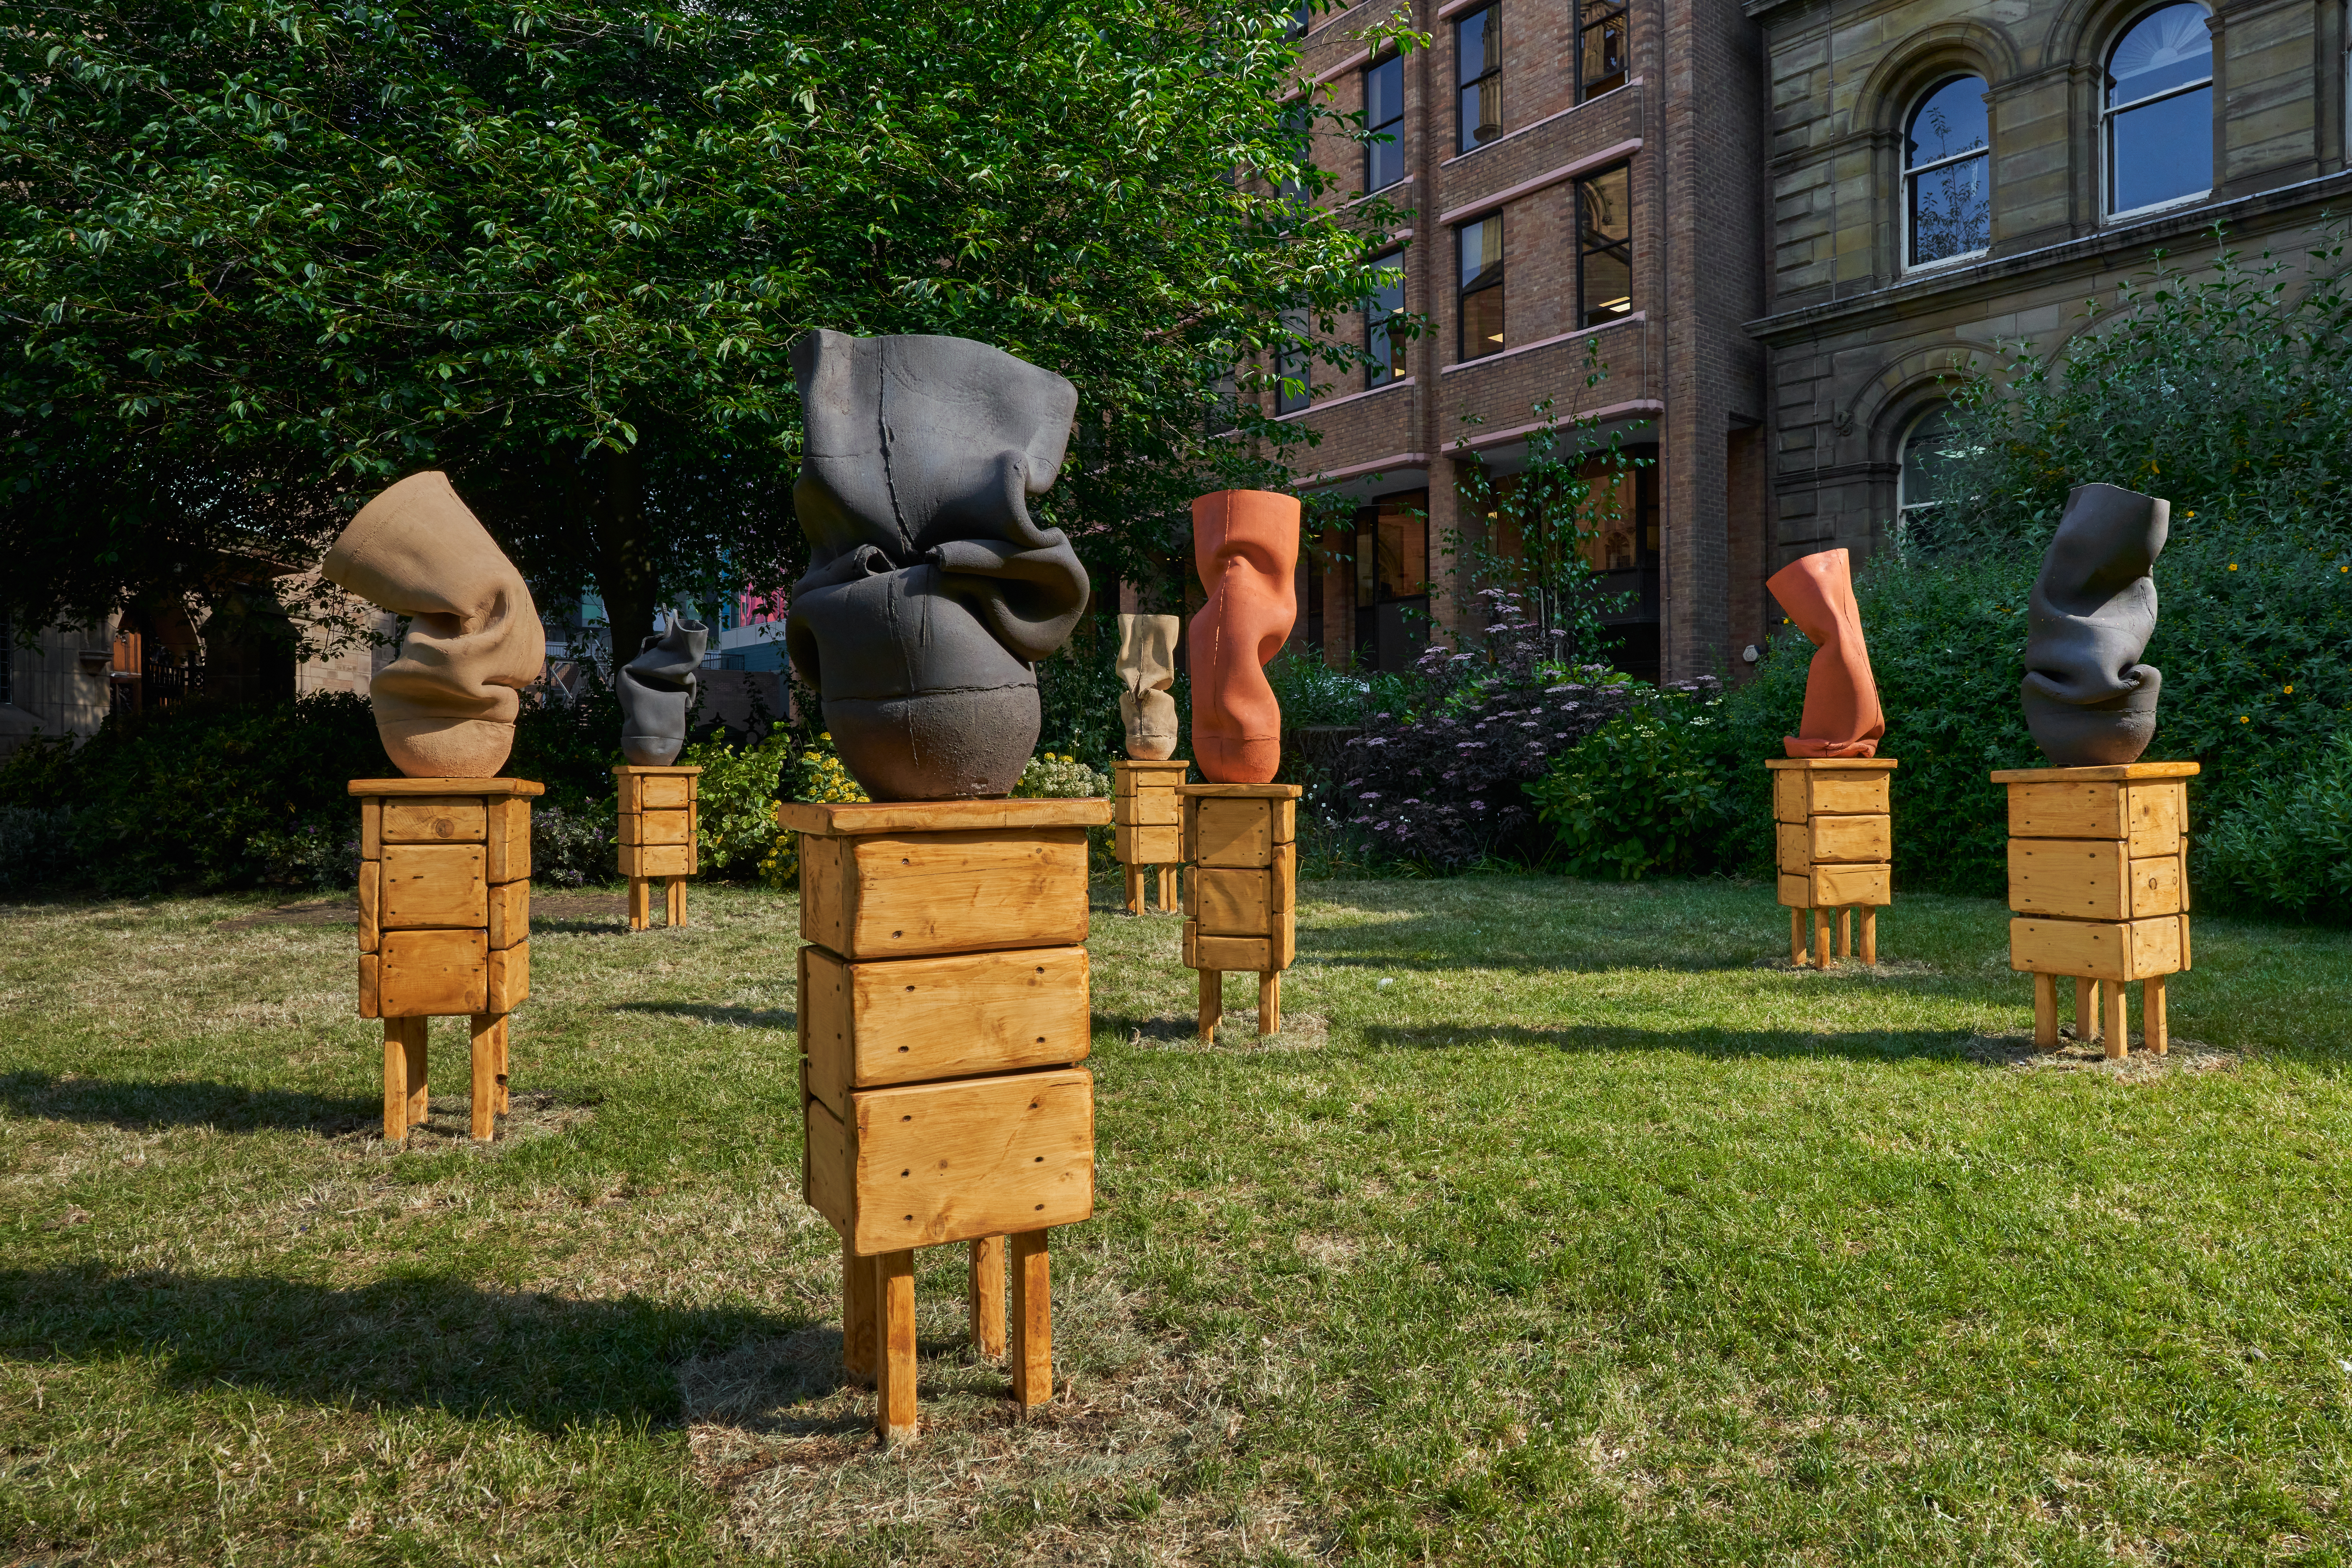 Seven wooden structures holding orange, black, and tan colored sculptural objects are spread out on a green lawn.